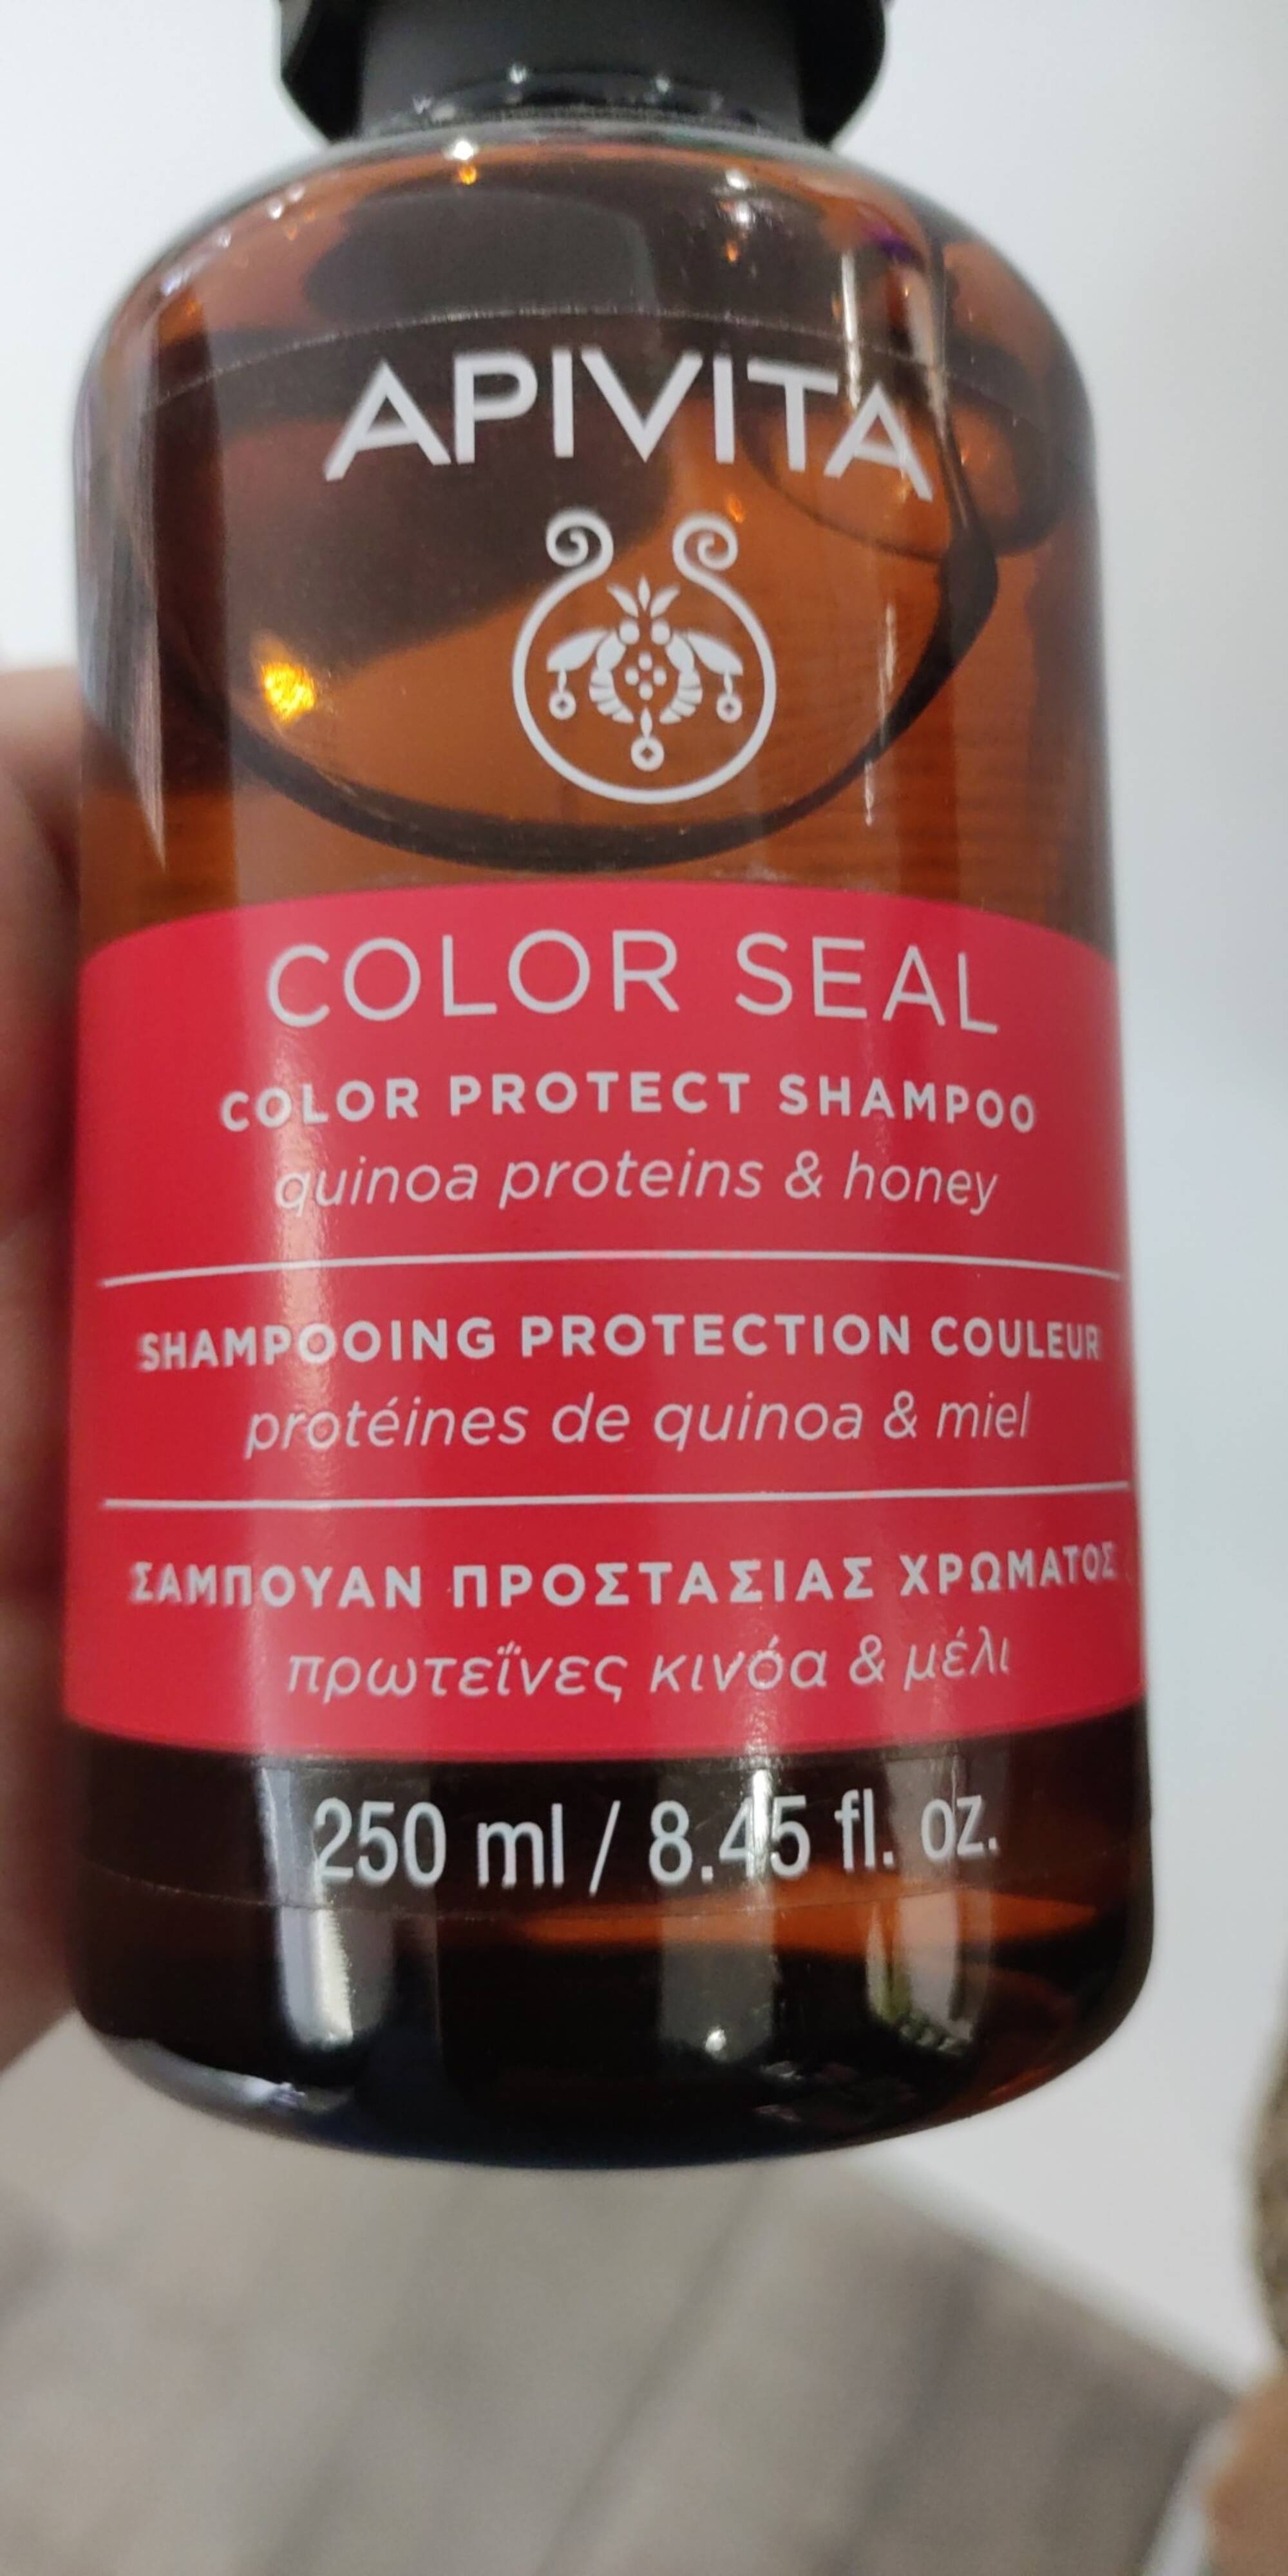 APIVITA - Color seal - Shampooing protection couleur